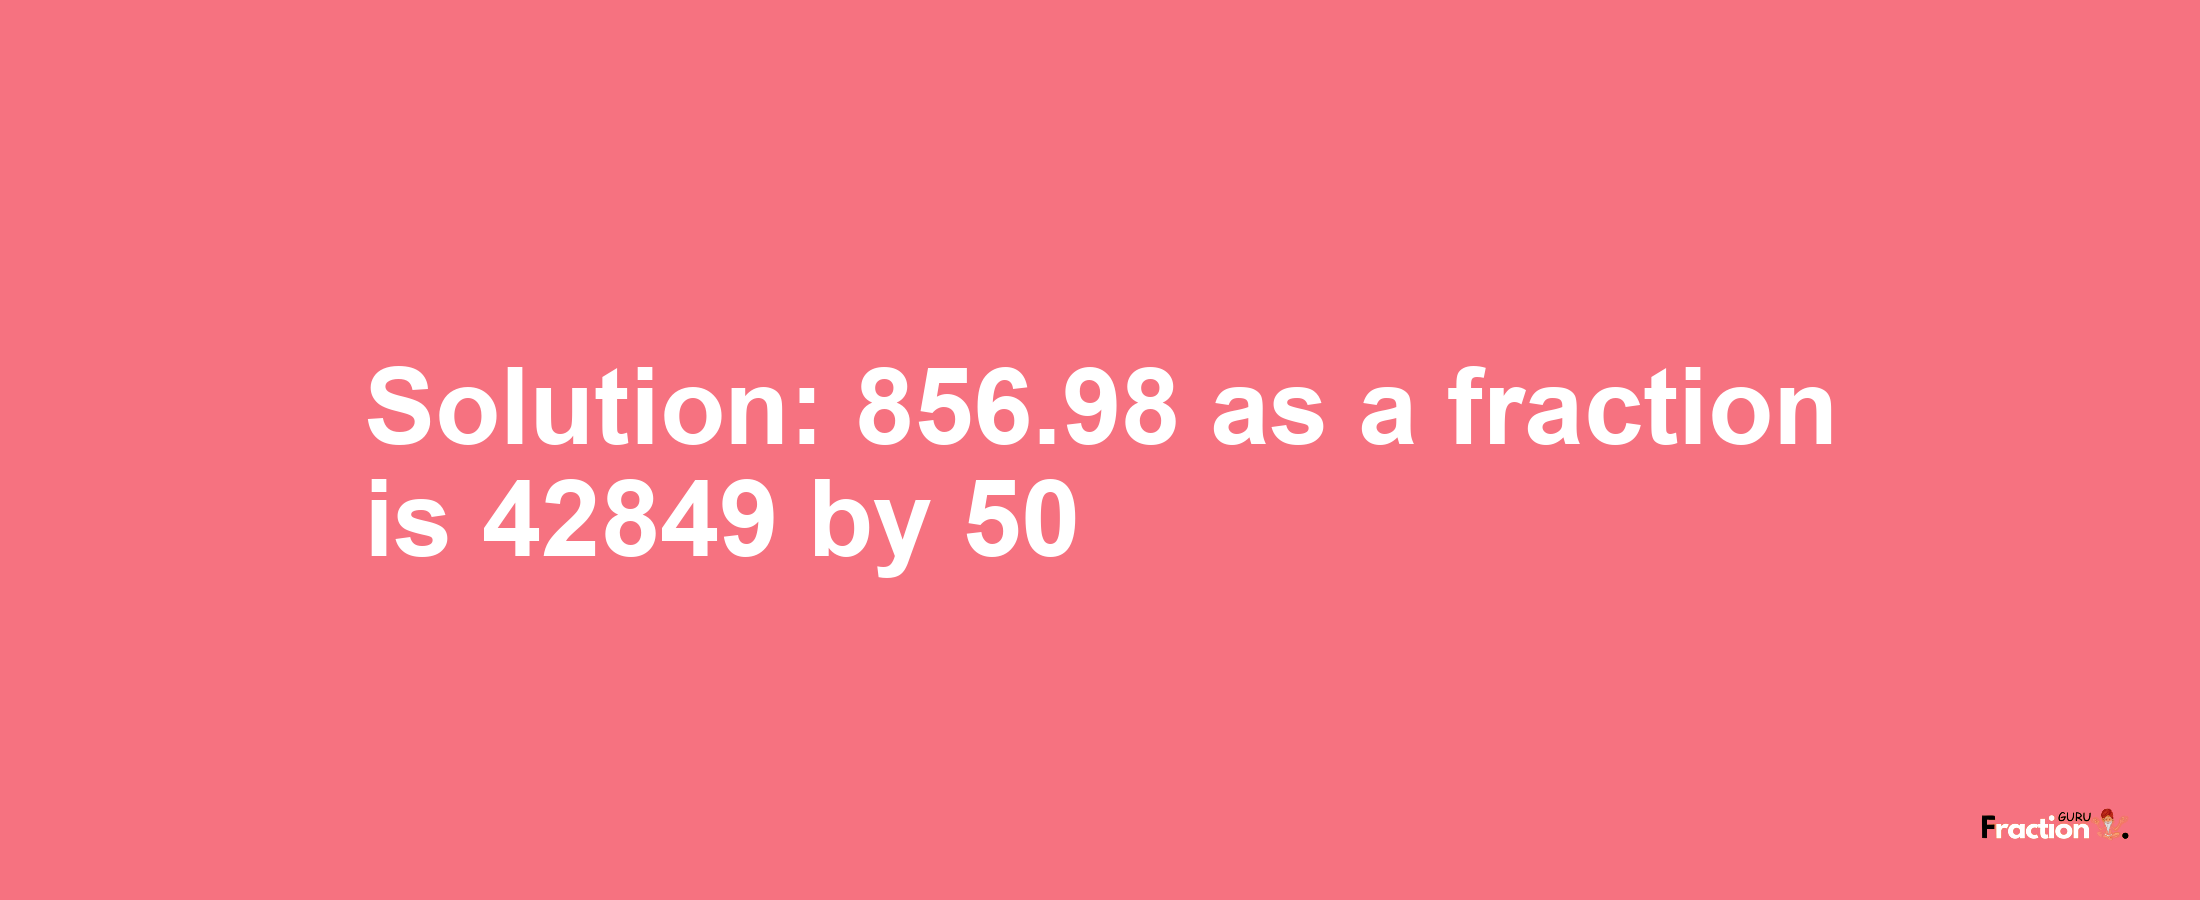 Solution:856.98 as a fraction is 42849/50